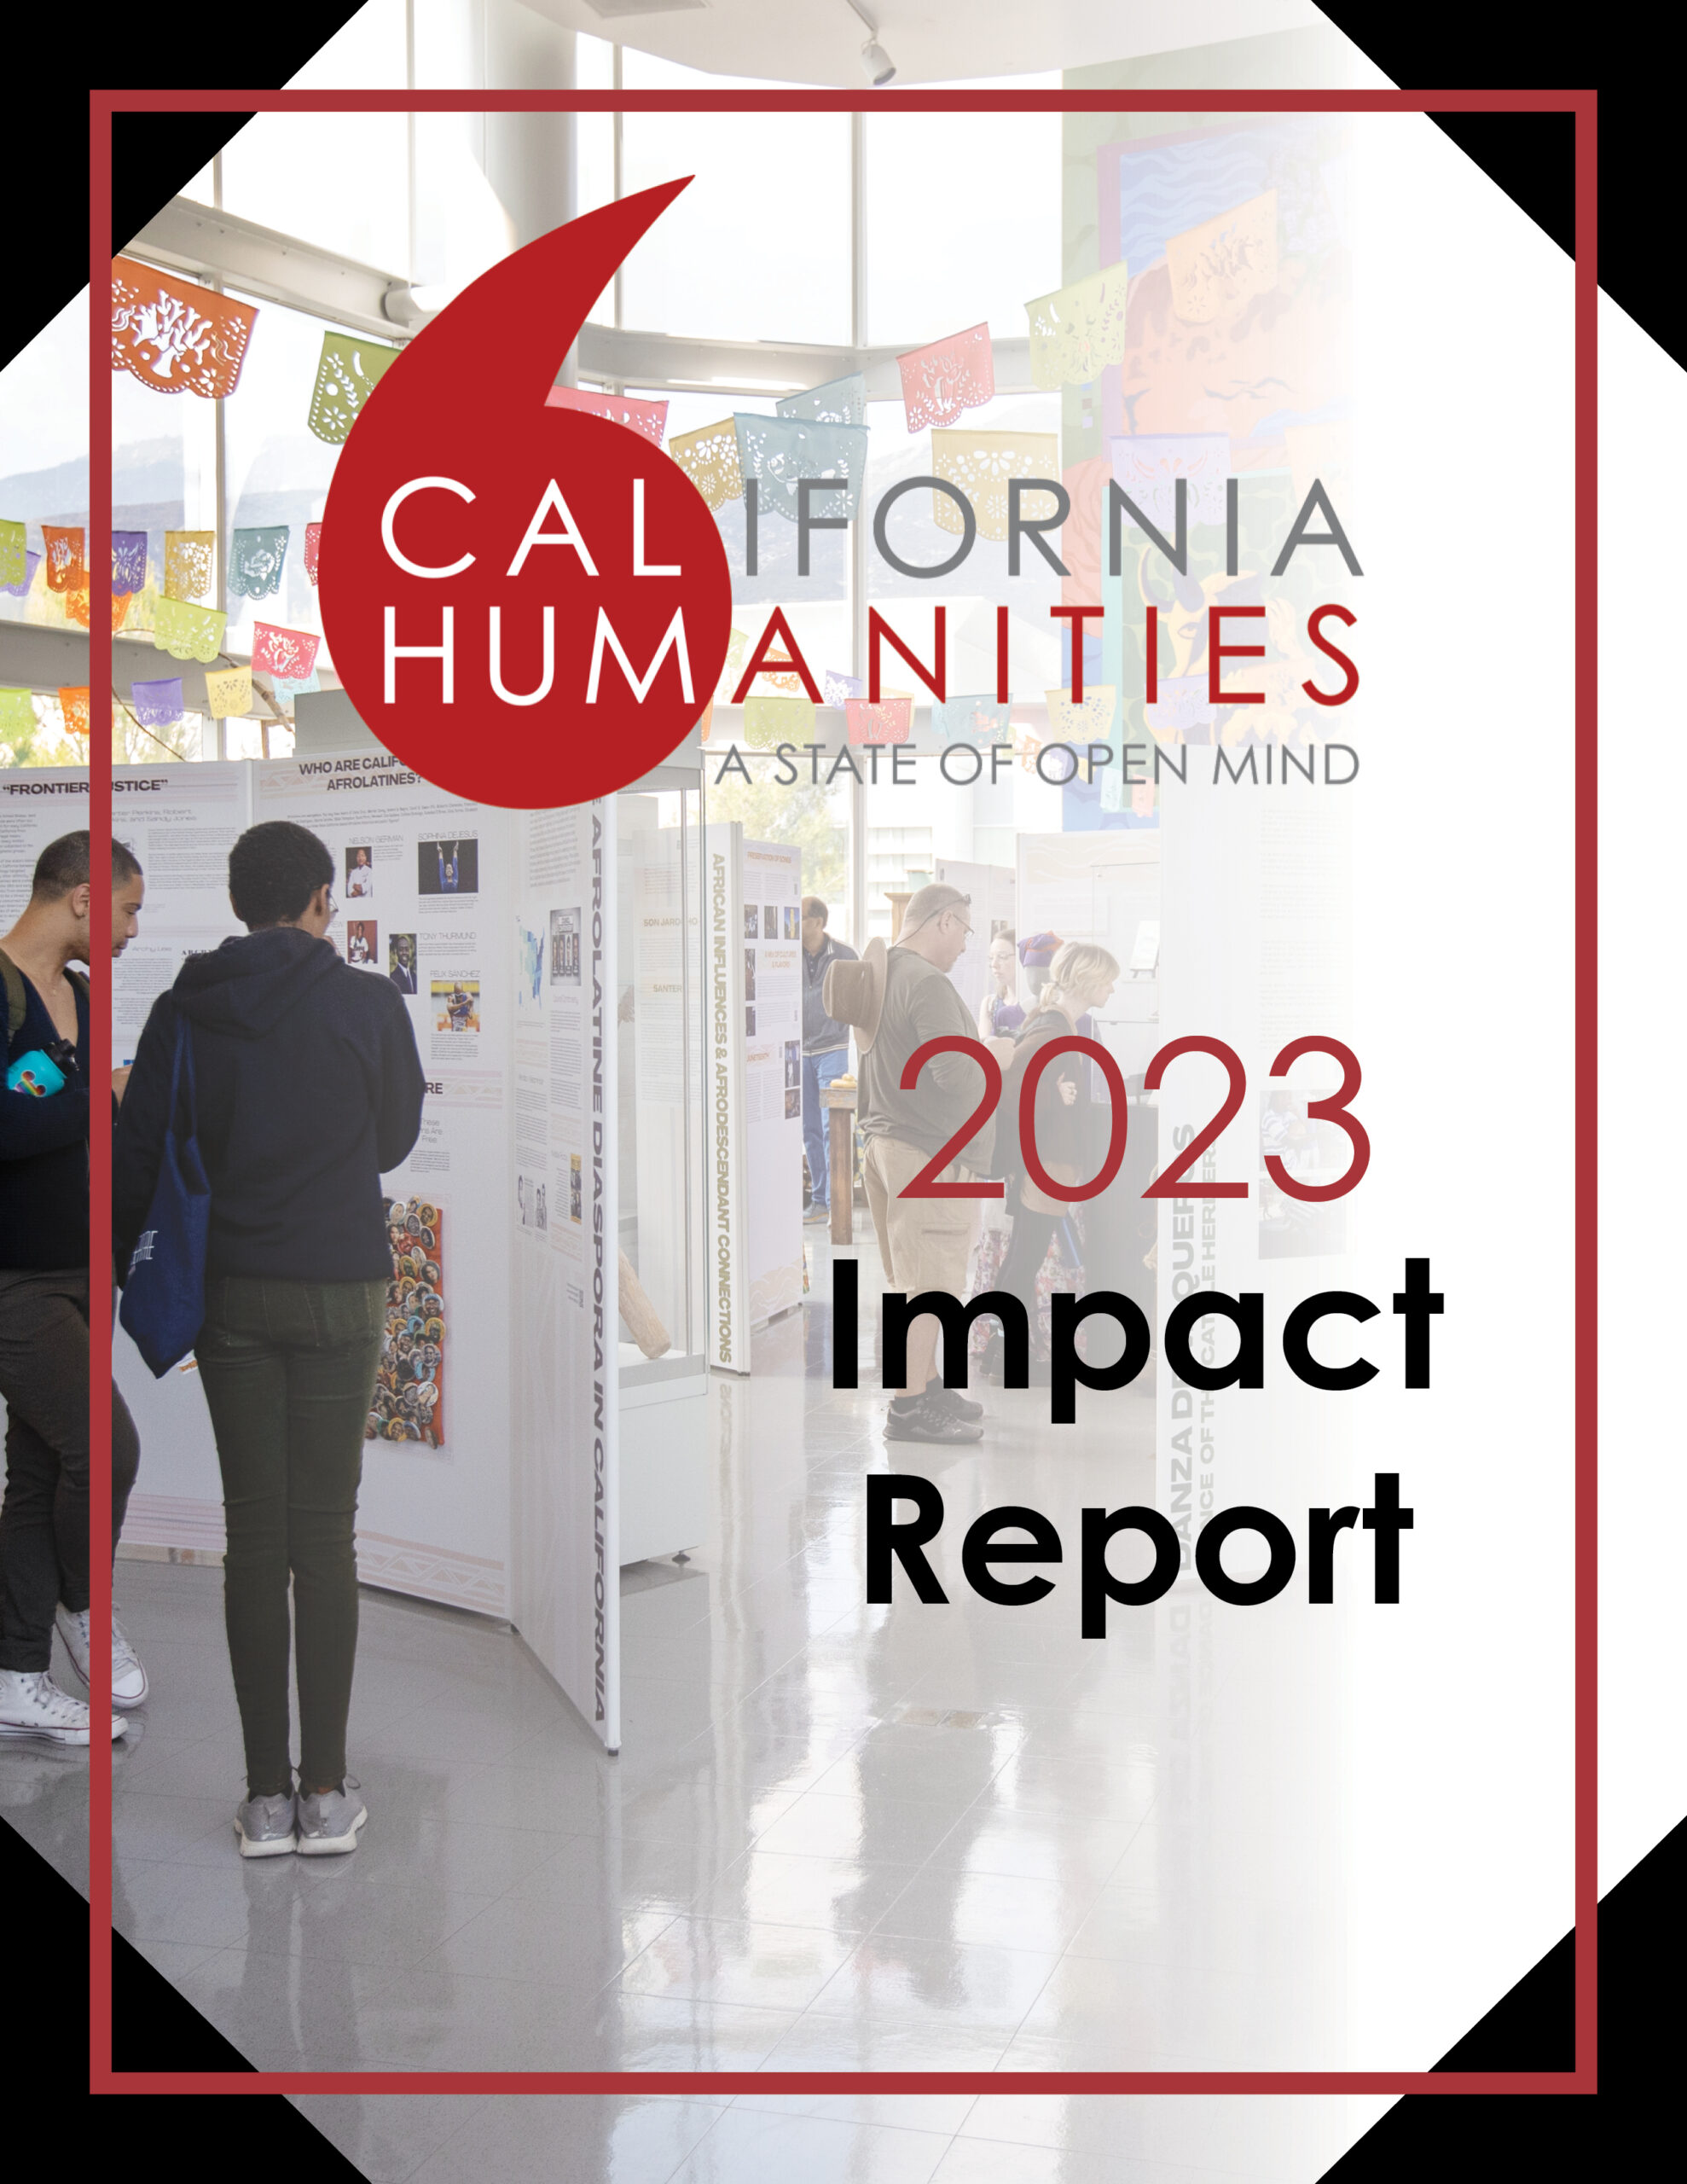 Impact report page 1 view: Red banner with California Humanities logo and "Impact Report 2022" title text. A section for "Program Highlights" with summaries of grant programs, and impact numbers section.